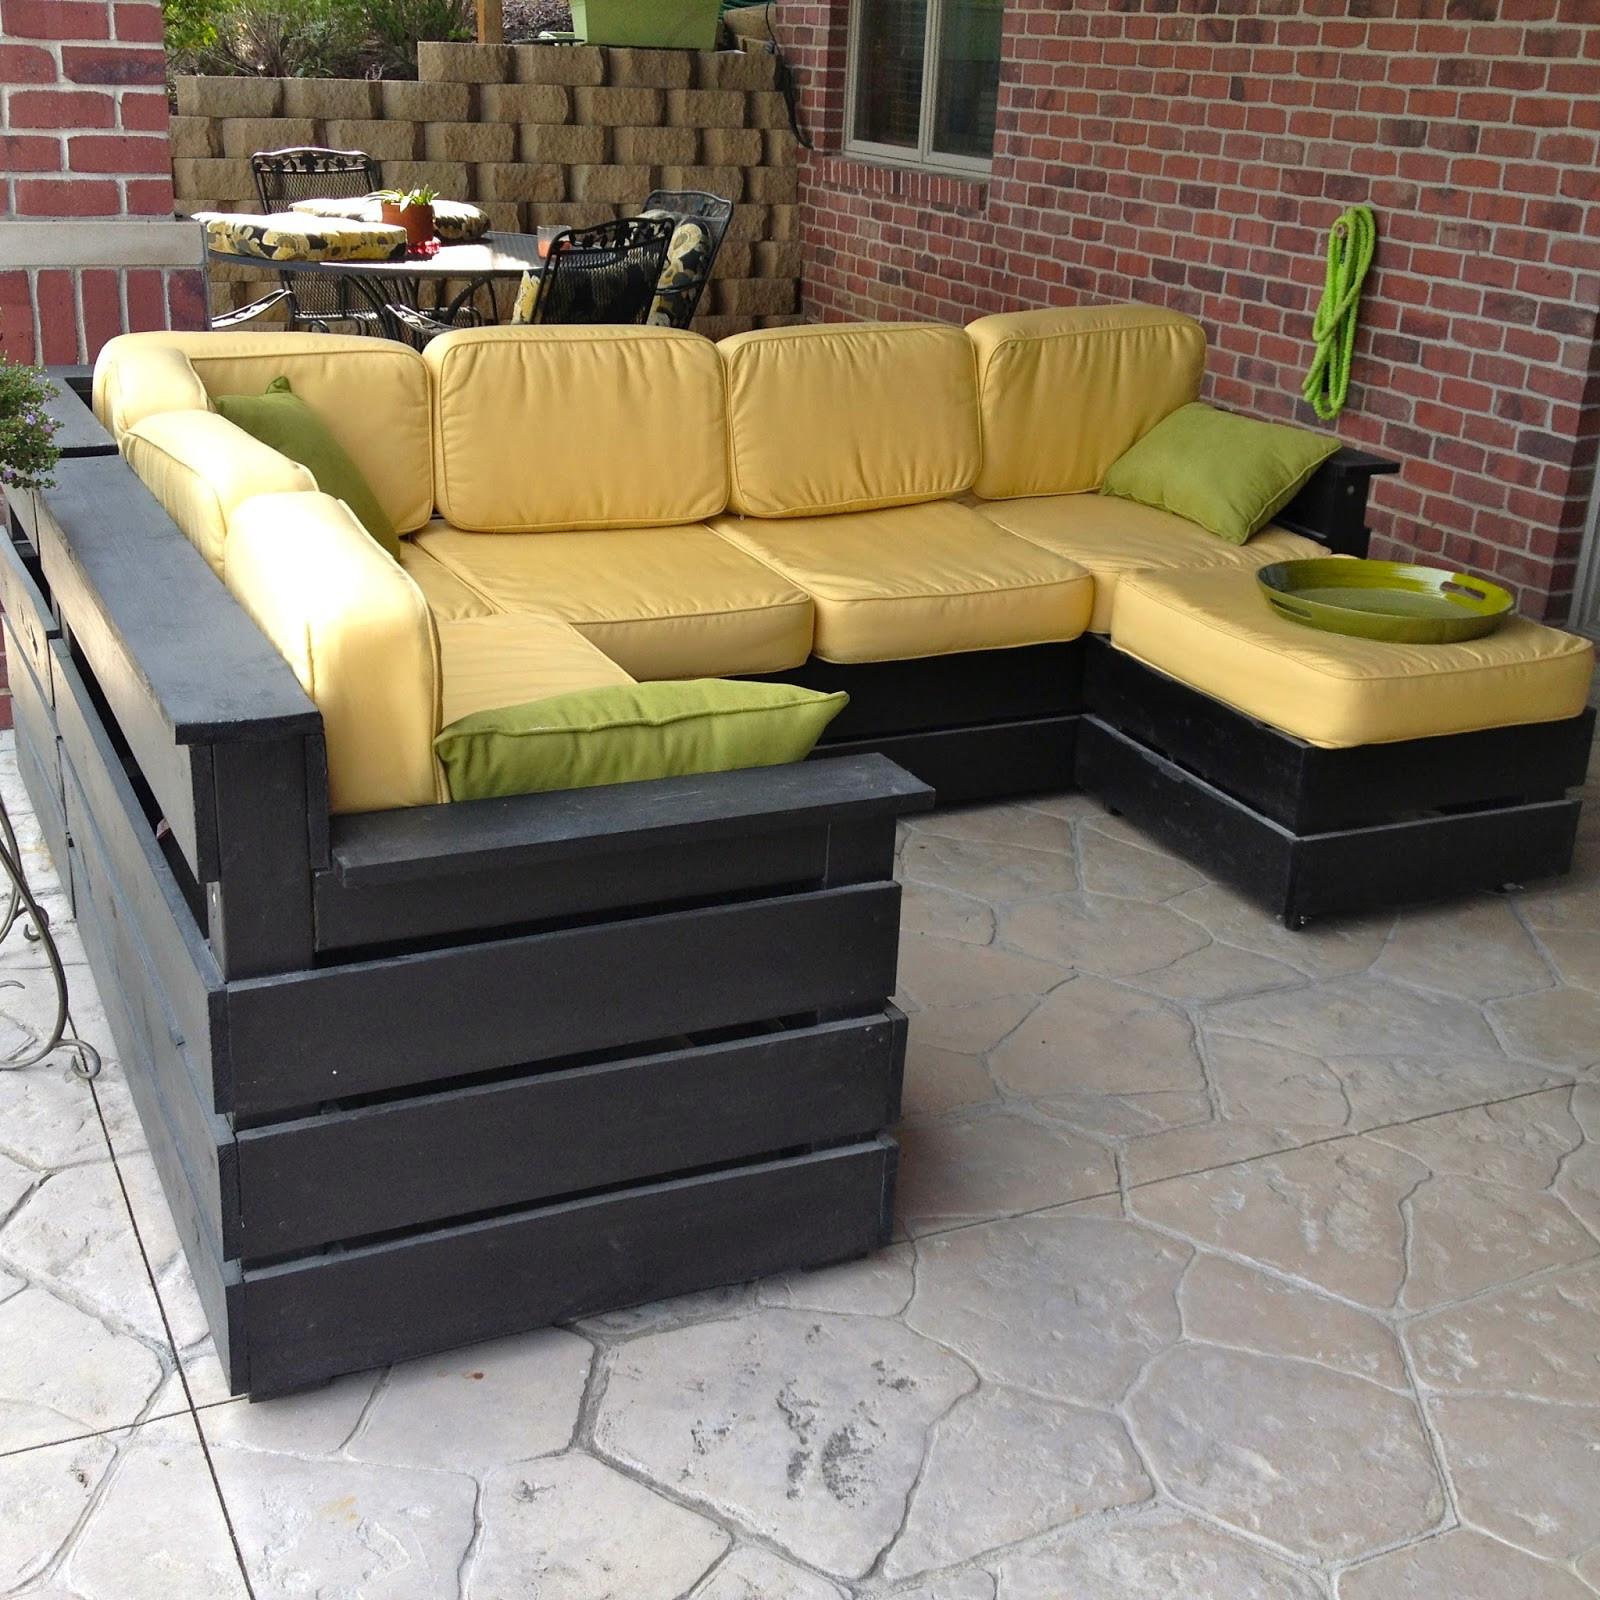 DIY Recliner Plans
 DIY Why Spend More DIY Outdoor Sectional